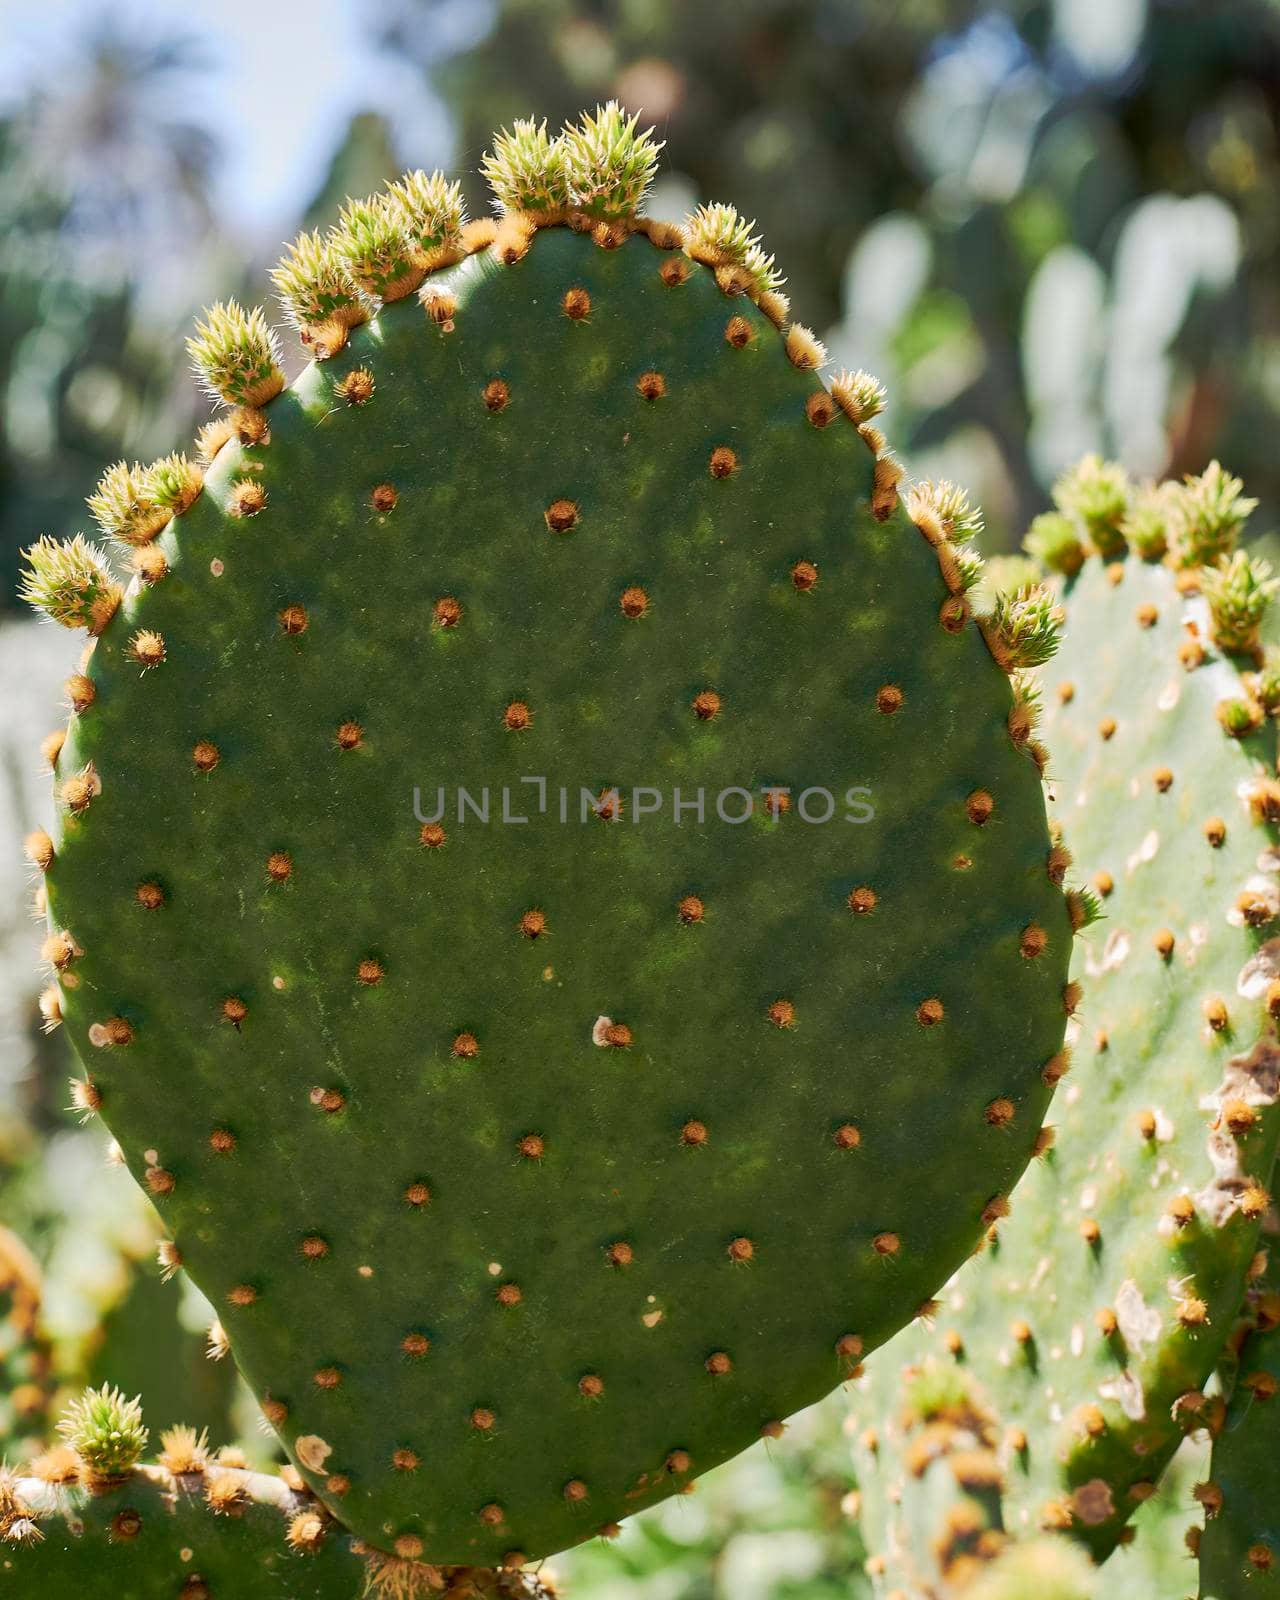 Several leaves of blinding cactus.Opuntia microdasys, out of focus background, macro photograph, sunny, front view